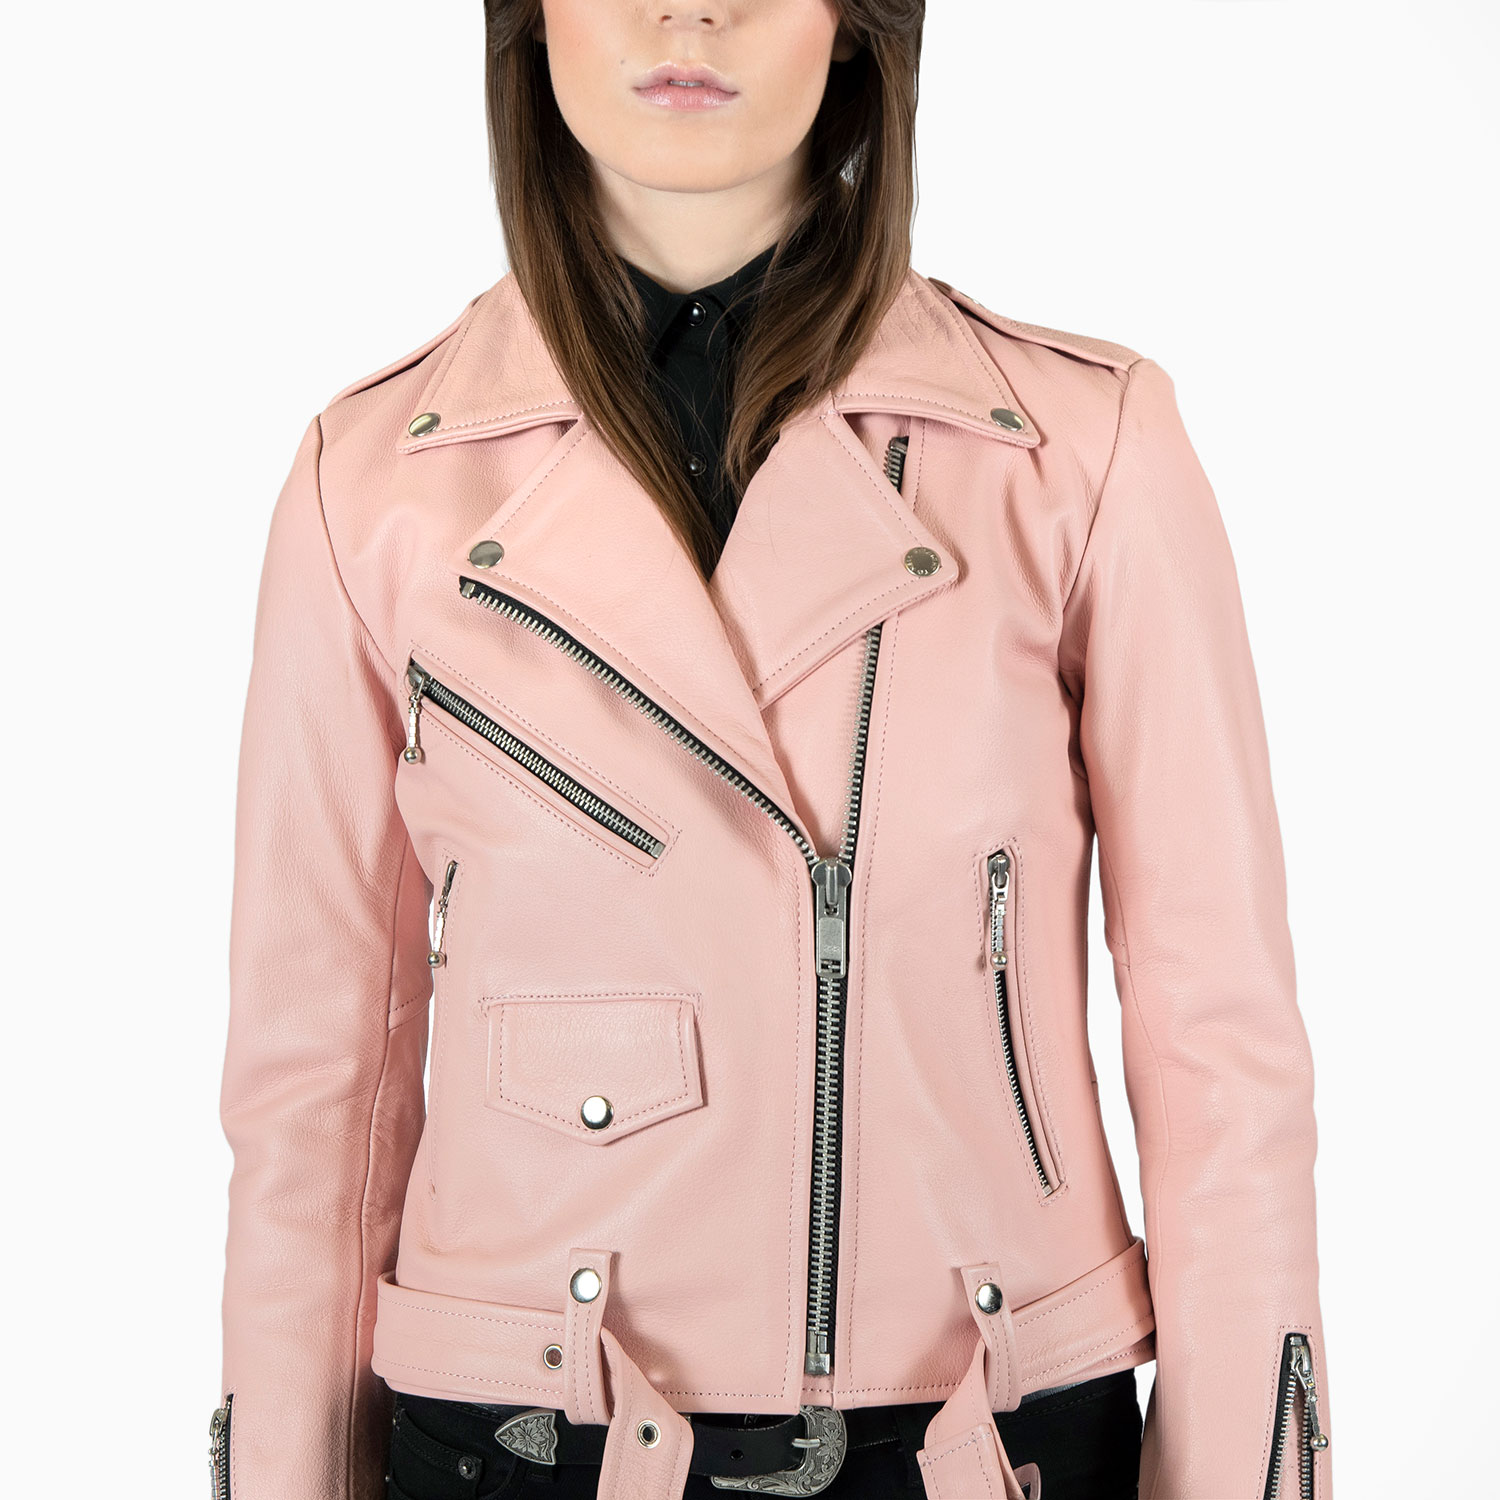 Straight 3XL, Pink Jacket XS, 2XL, Apparel Hell Commando To S, L, 4XL) Leather - | Dusty XL, M, (Size